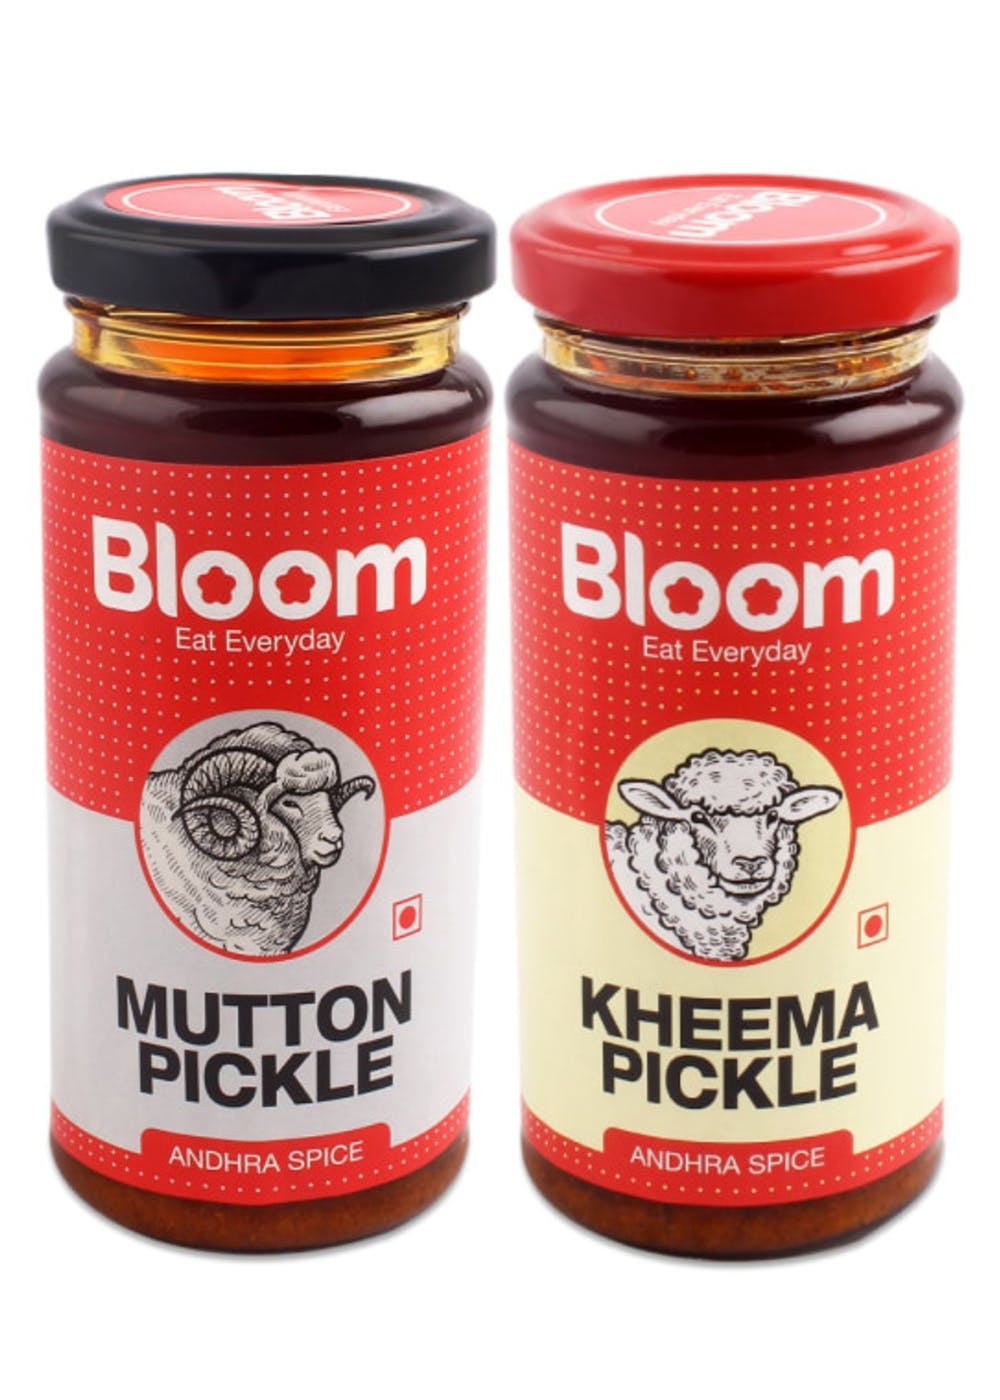 Boneless Andhra Mutton Pickle & Andhra Keema Pickles Combo